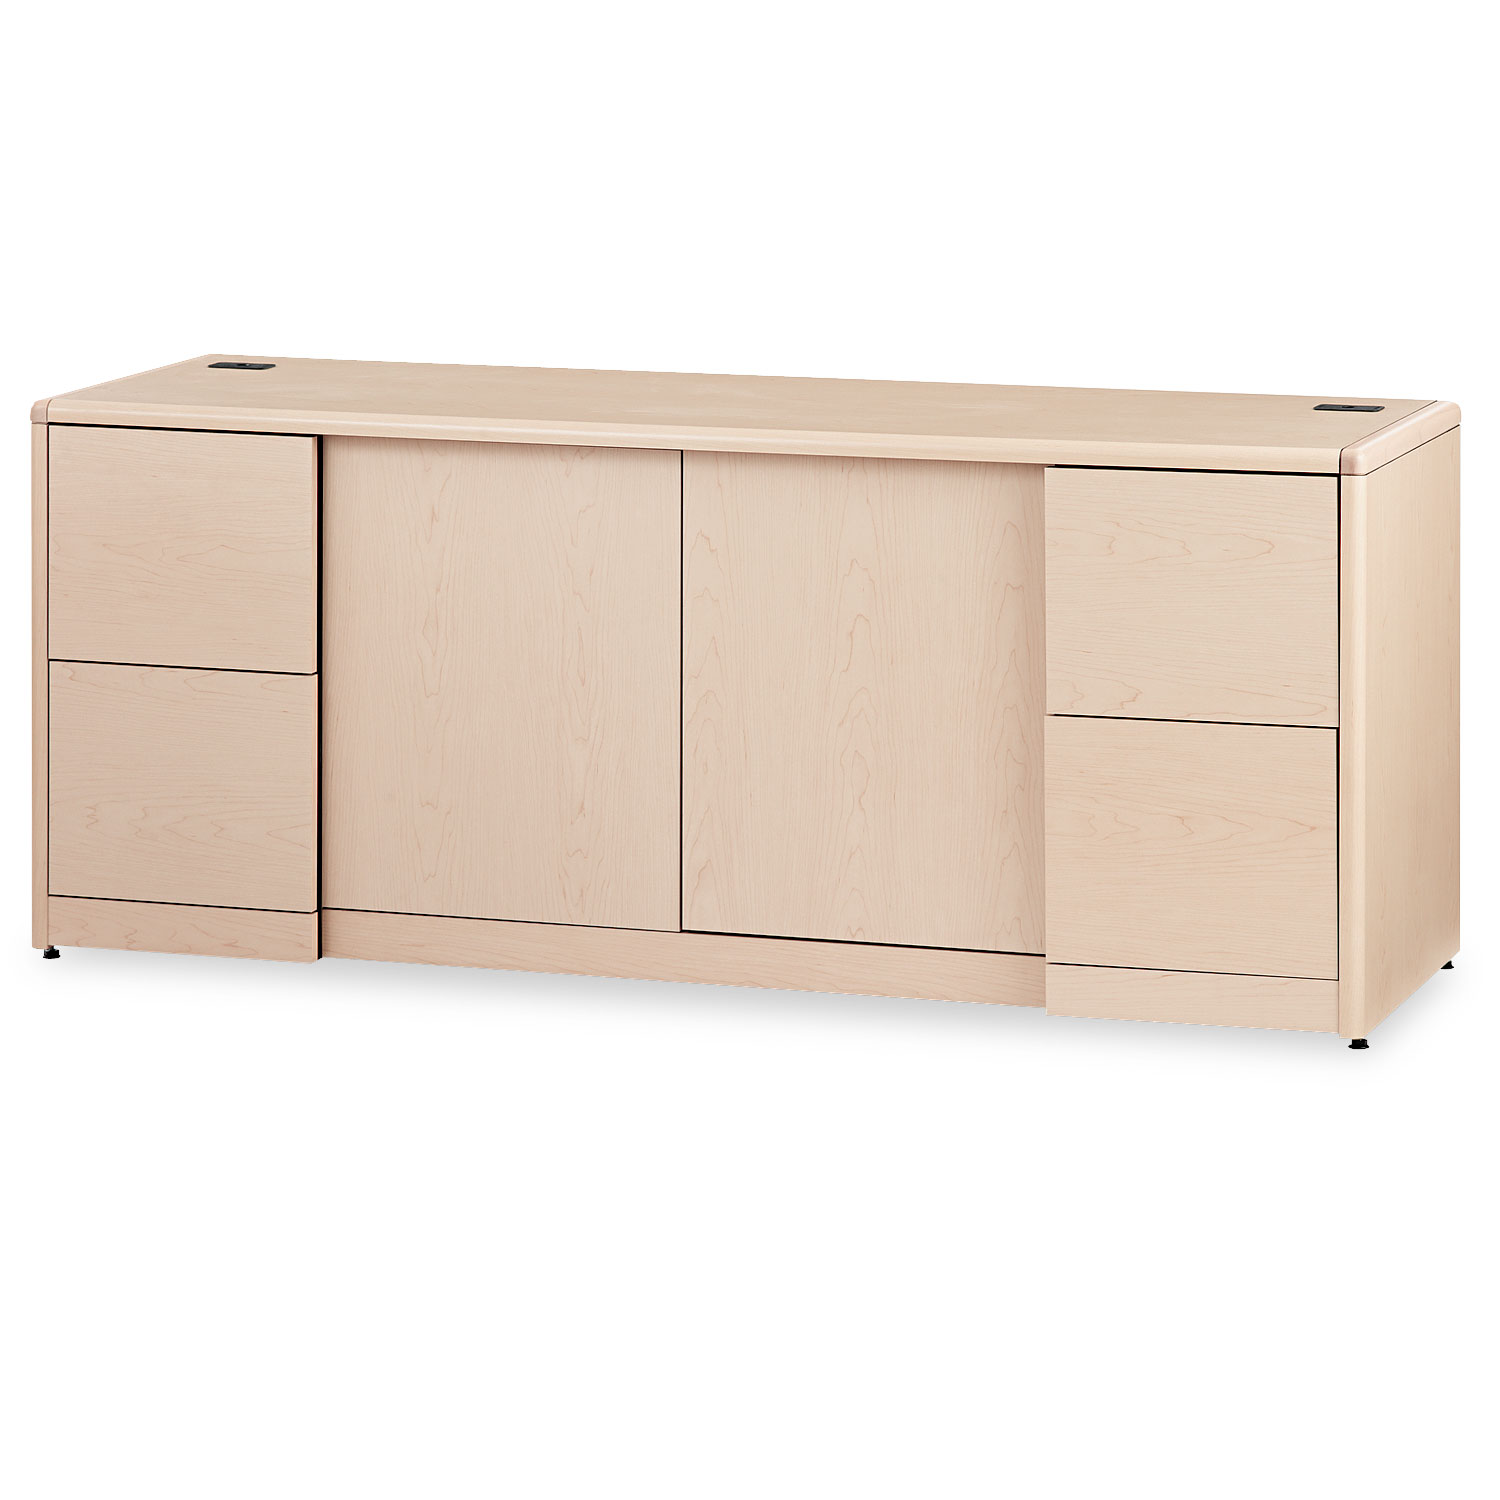 10700 Series Credenza w/Doors, 72w x 24d x 29 1/2h, Natural Maple